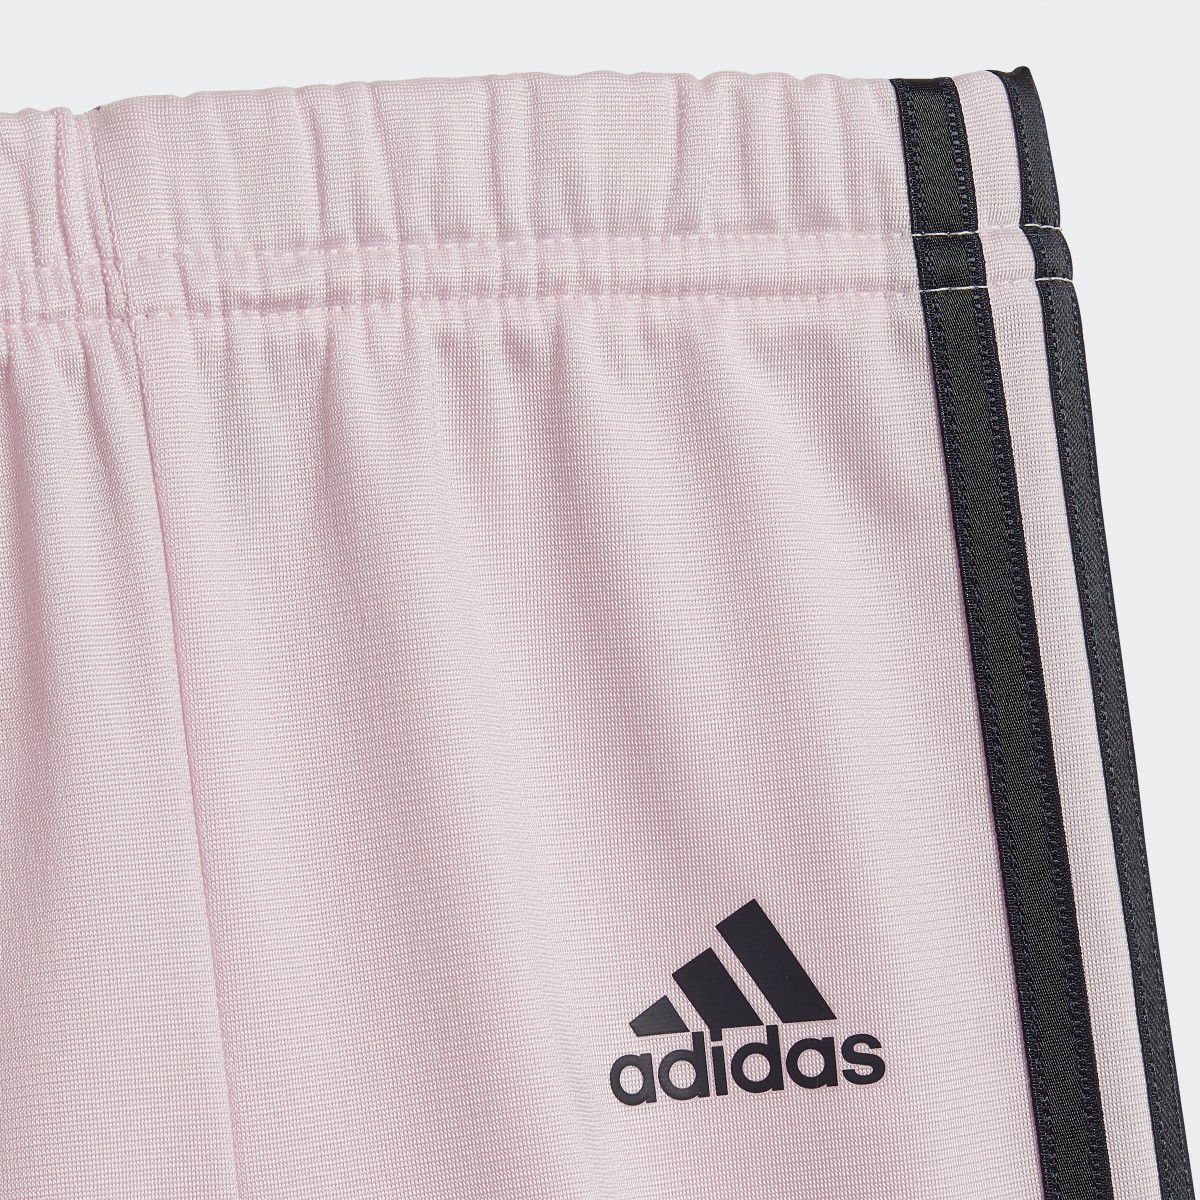 Adidas 3-Stripes Tricot Track Suit. 9